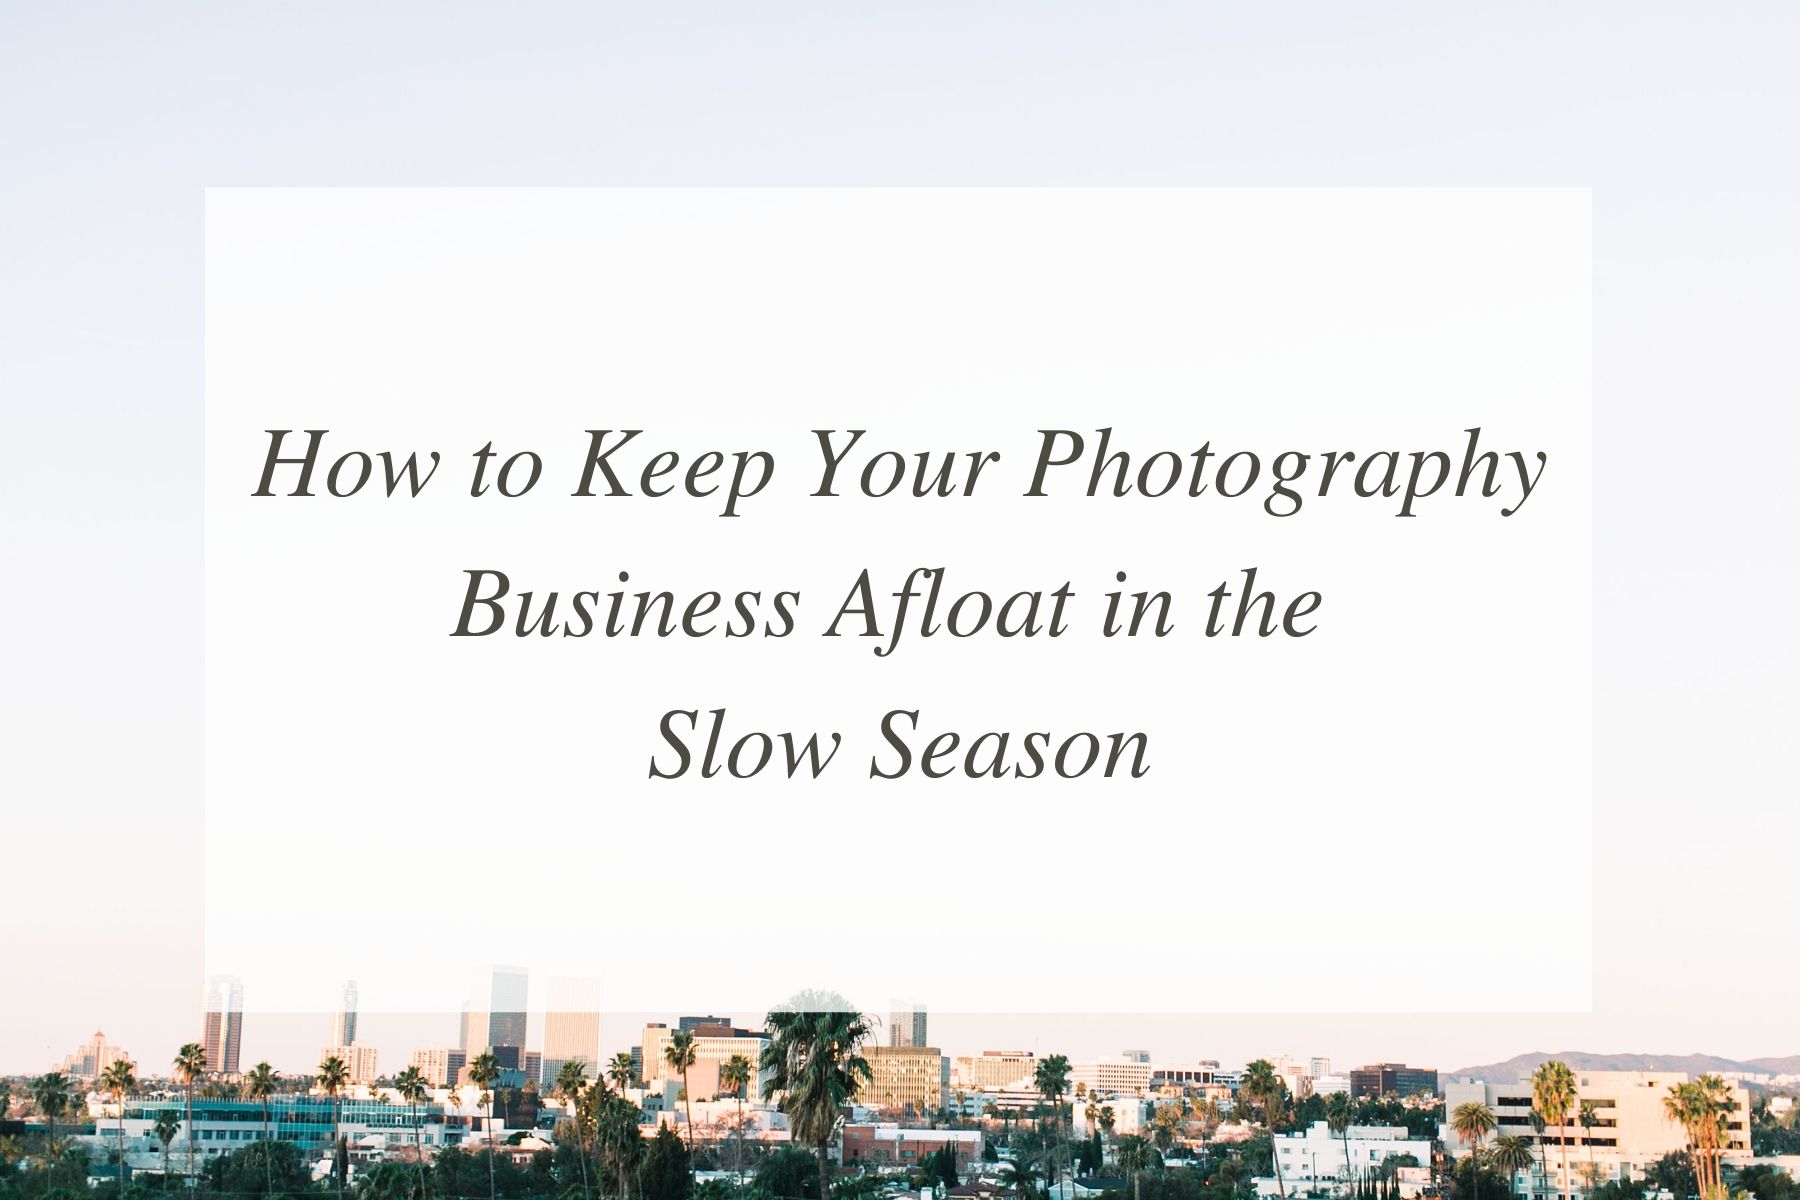 How to Keep Your Photography Business Afloat in the Slow Season